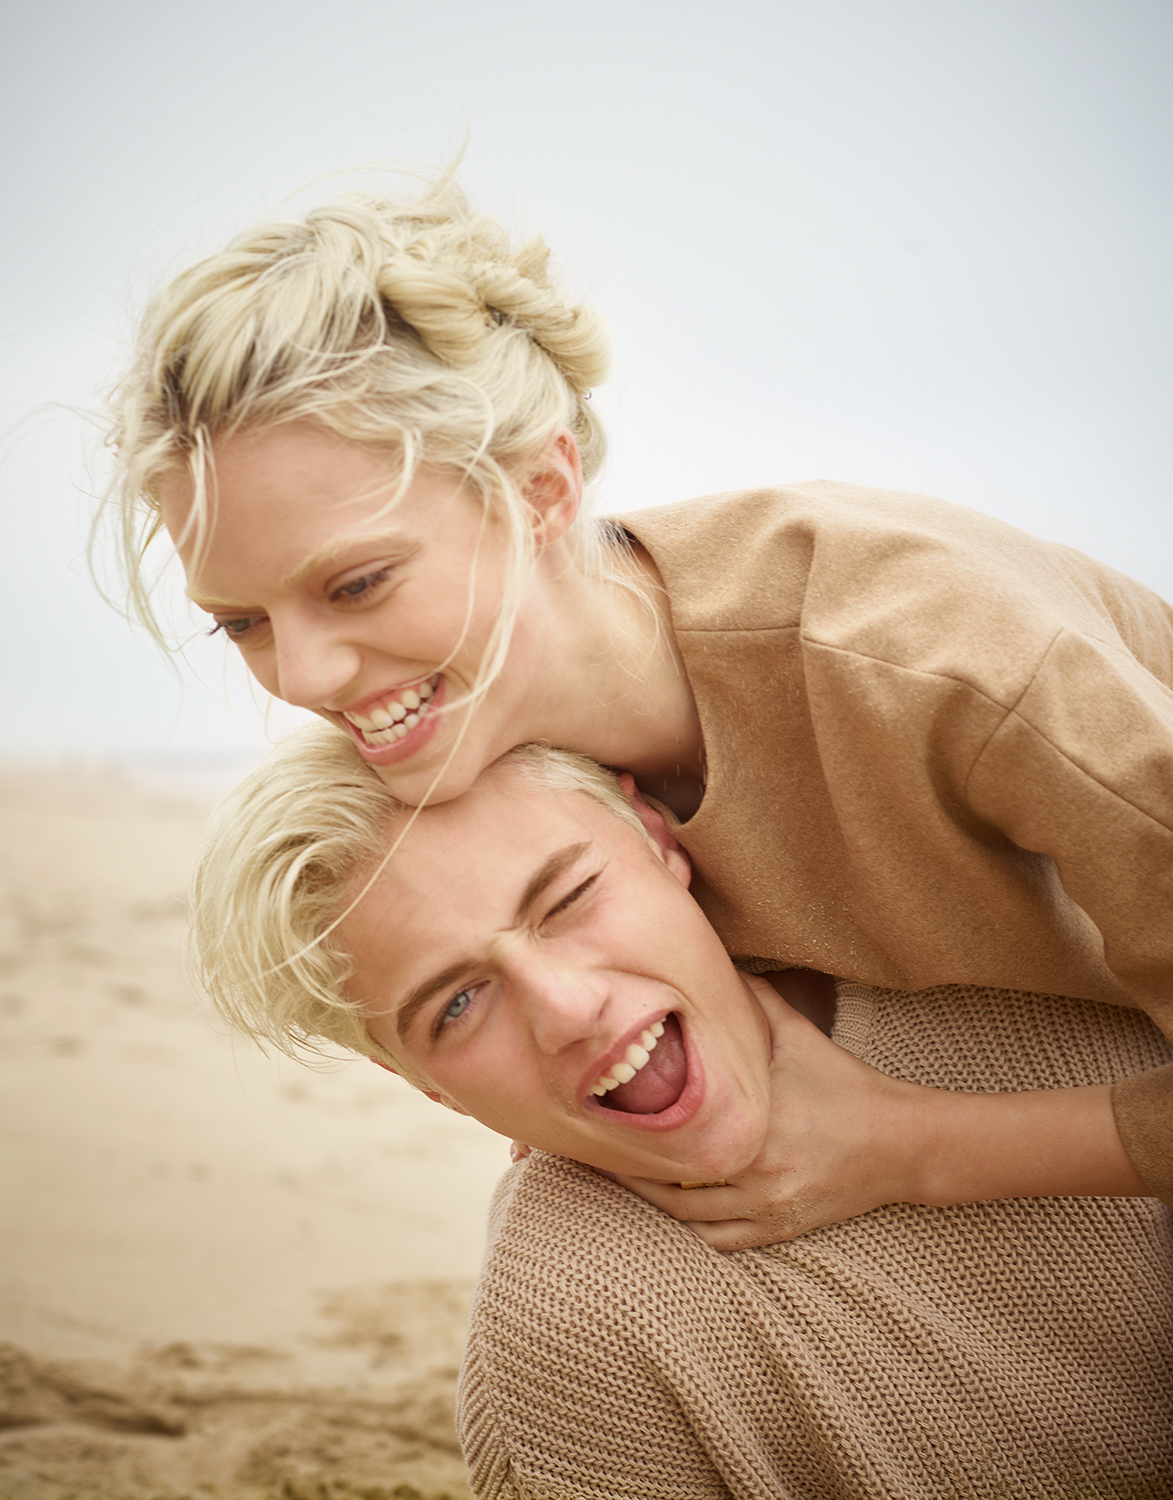 Trendi Lucky Blue Smith Sisters 2015 Cover Photo Shoot 002